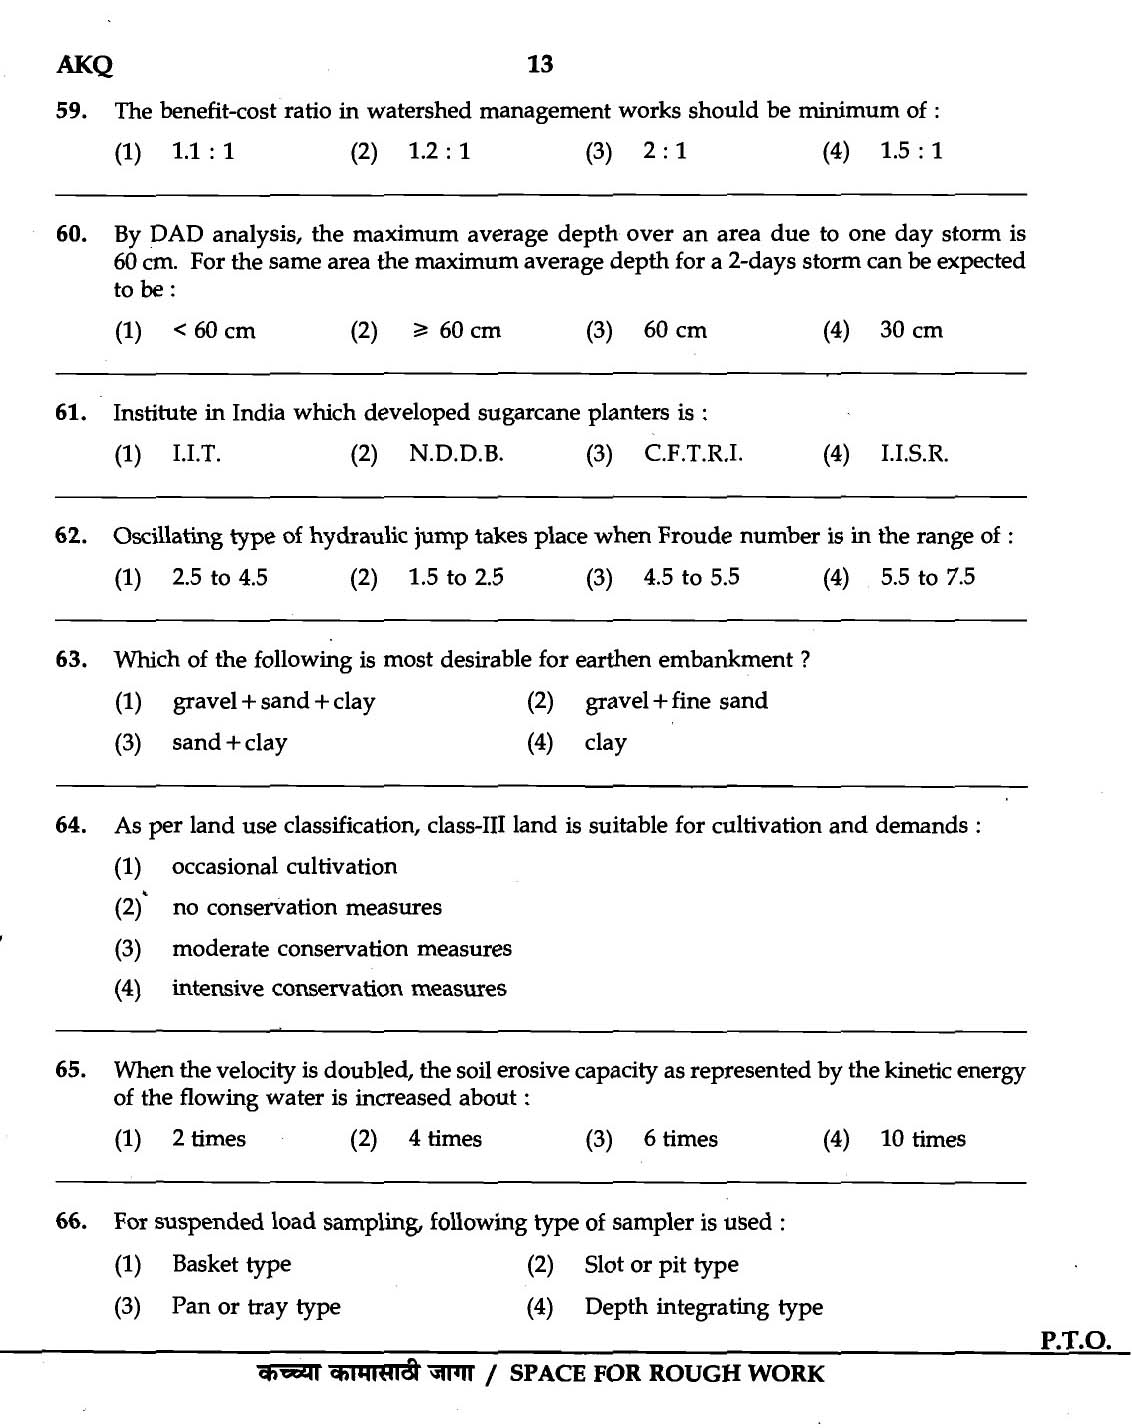 MPSC Agricultural Services Exam 2007 Question Paper Agricultural Engineering 11